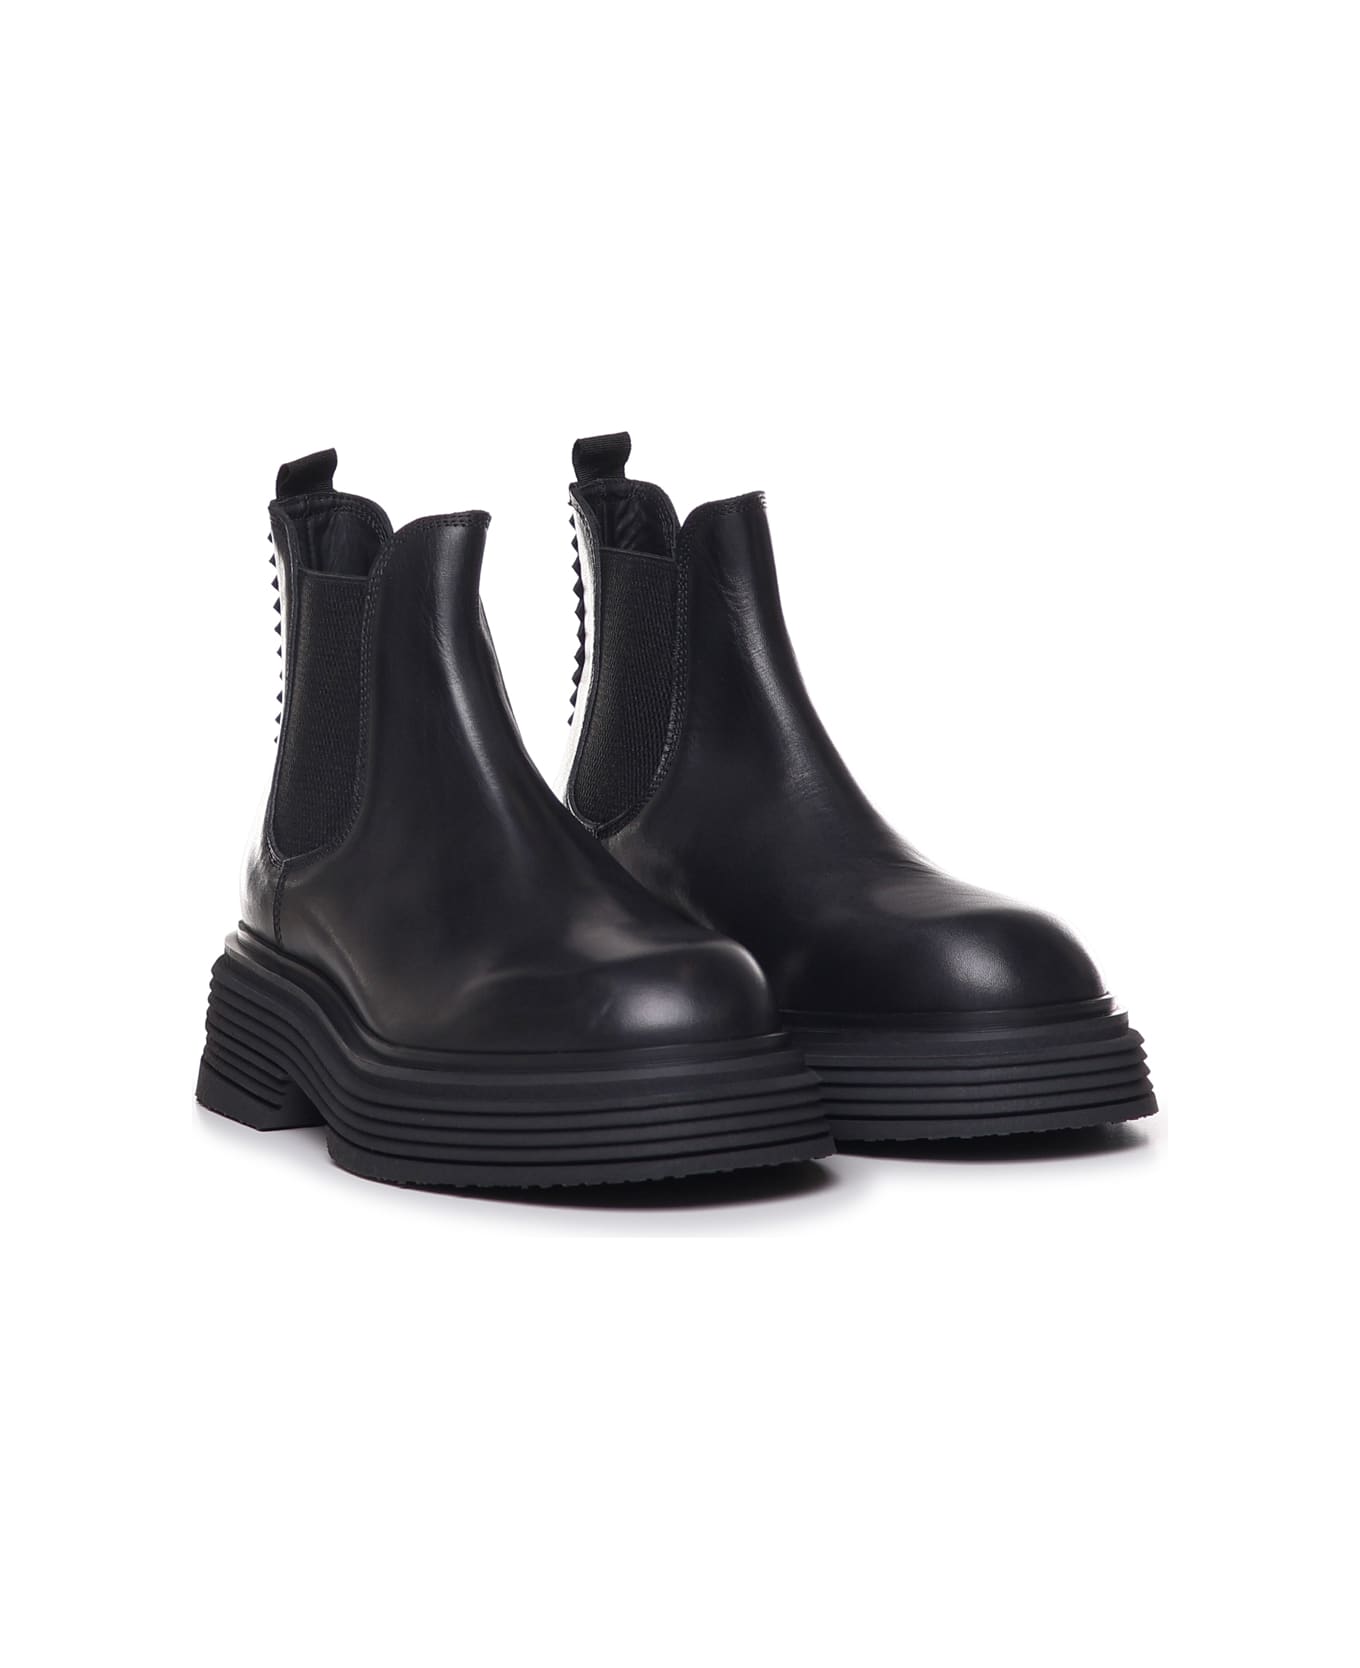 The Antipode Leather Beatles Boots - Black